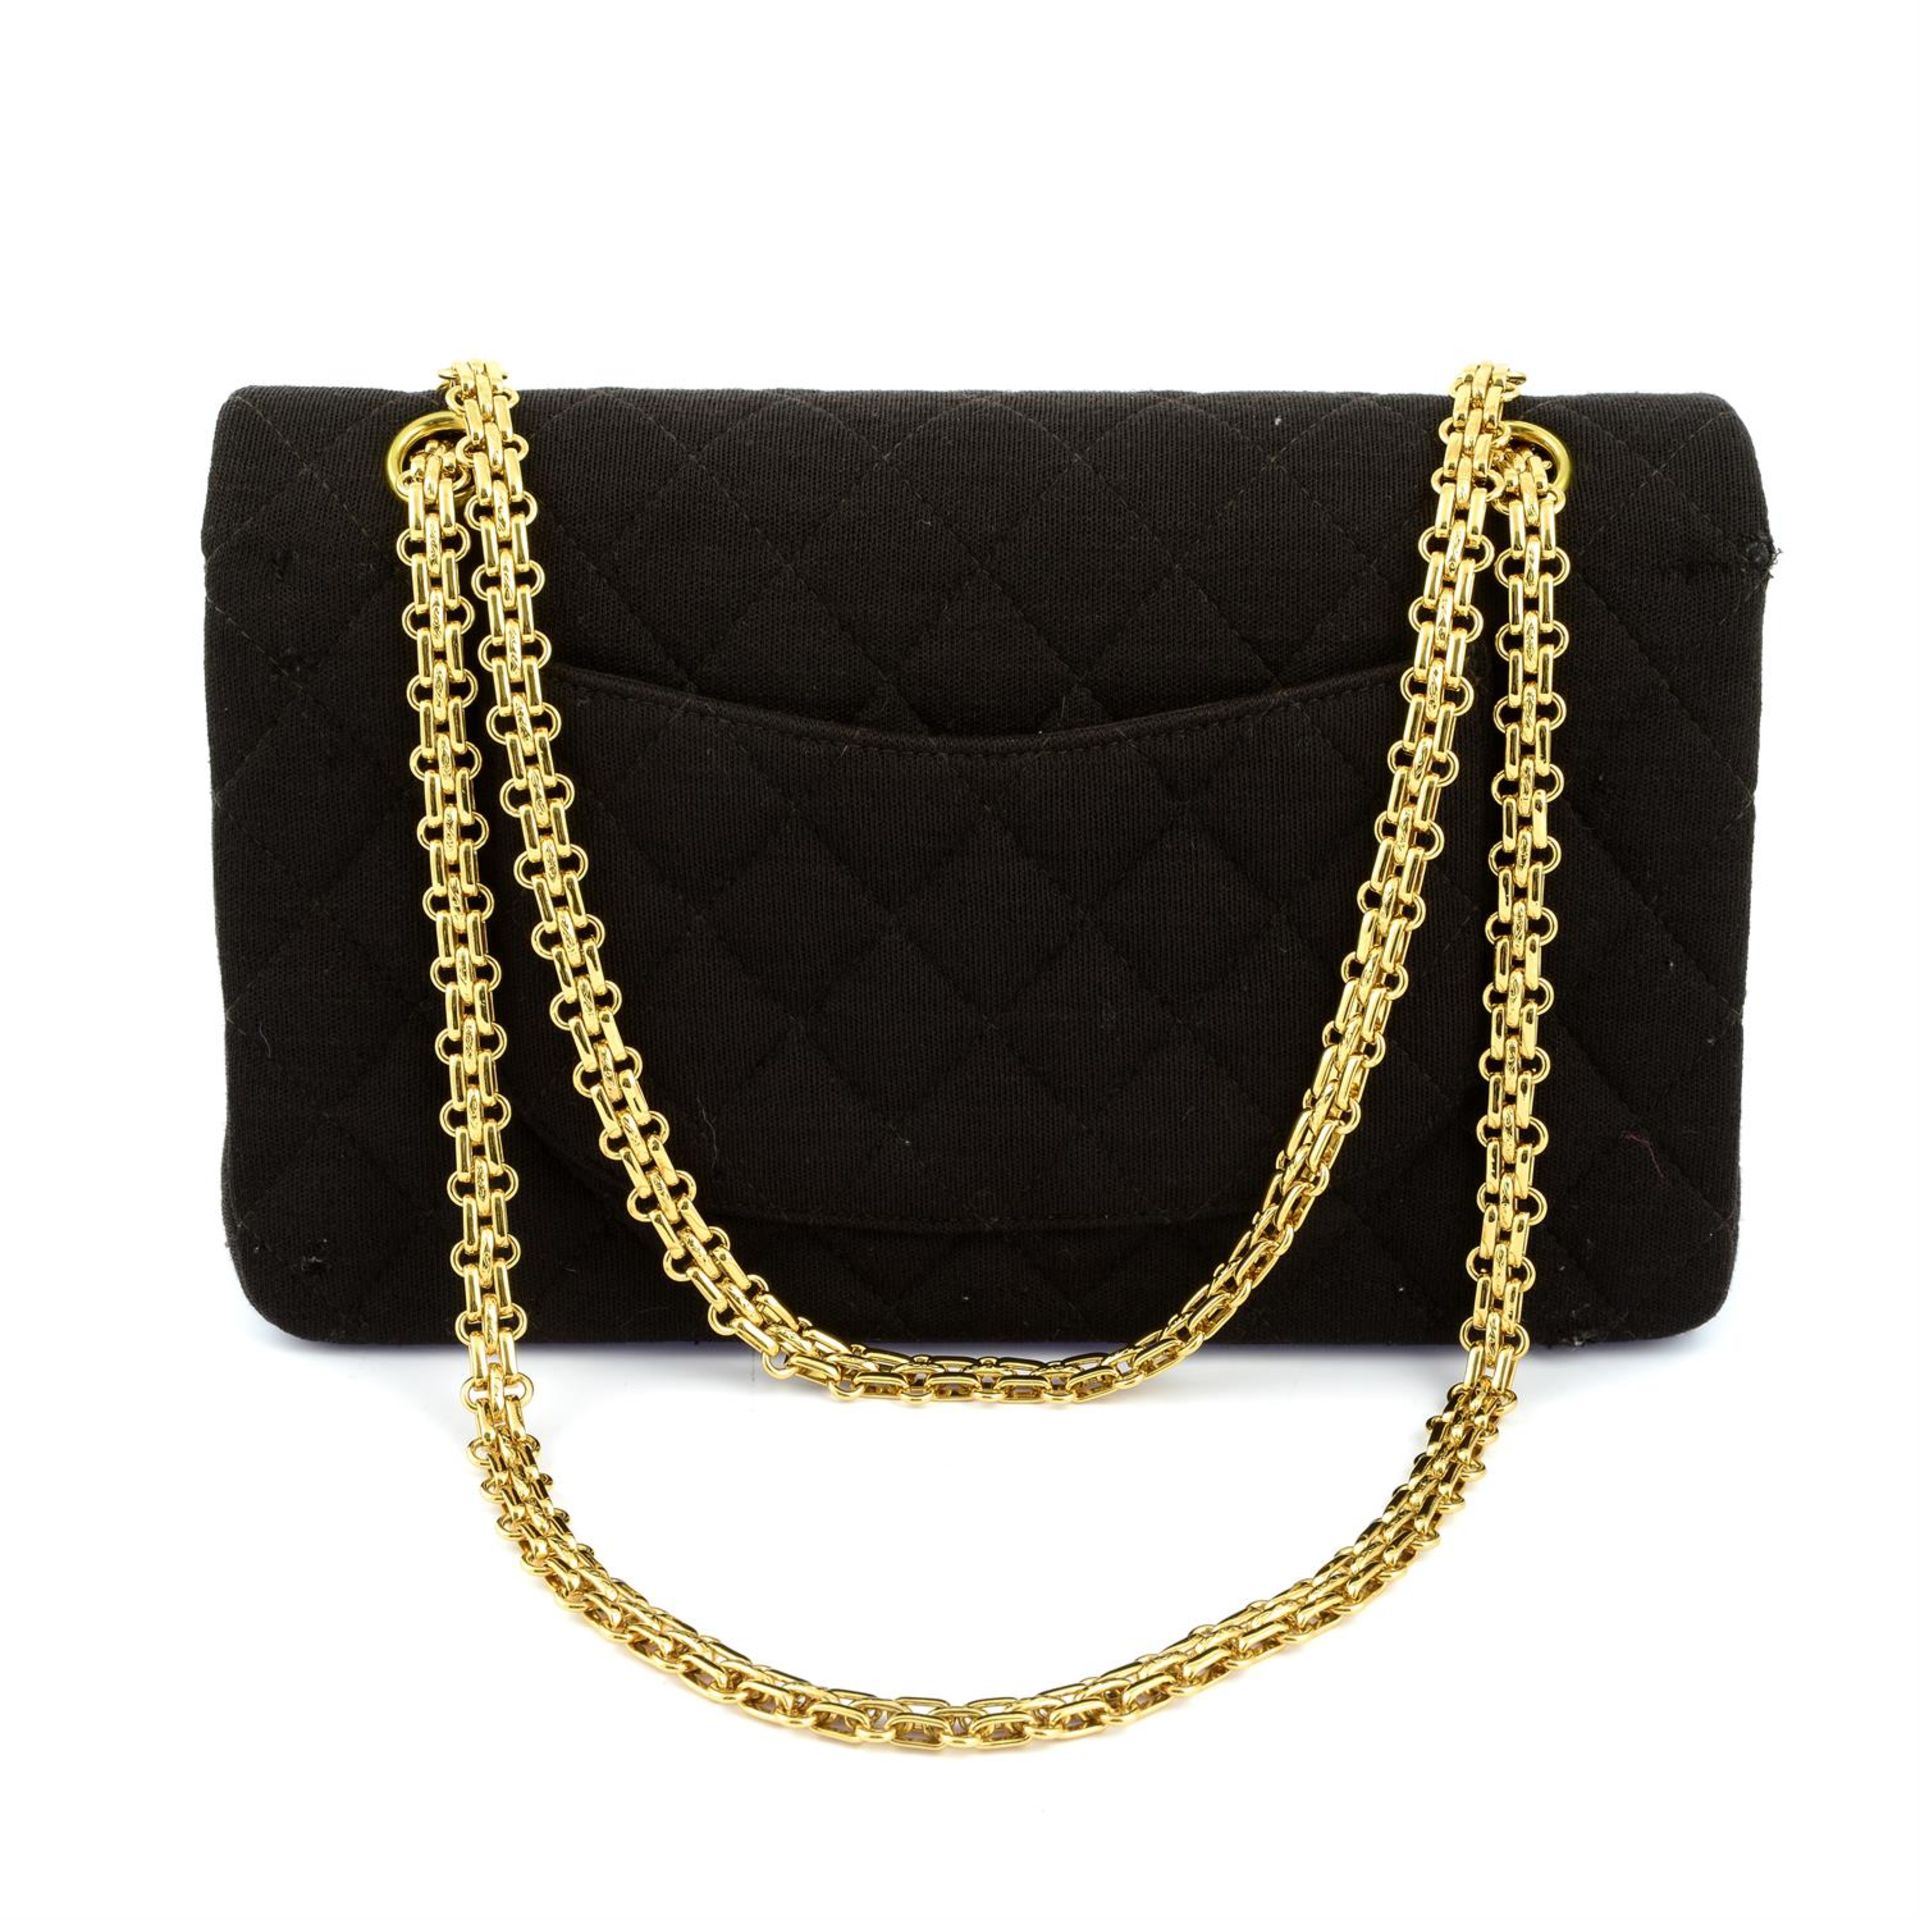 CHANEL - a Jersey fabric Classic double flap handbag. - Image 2 of 6